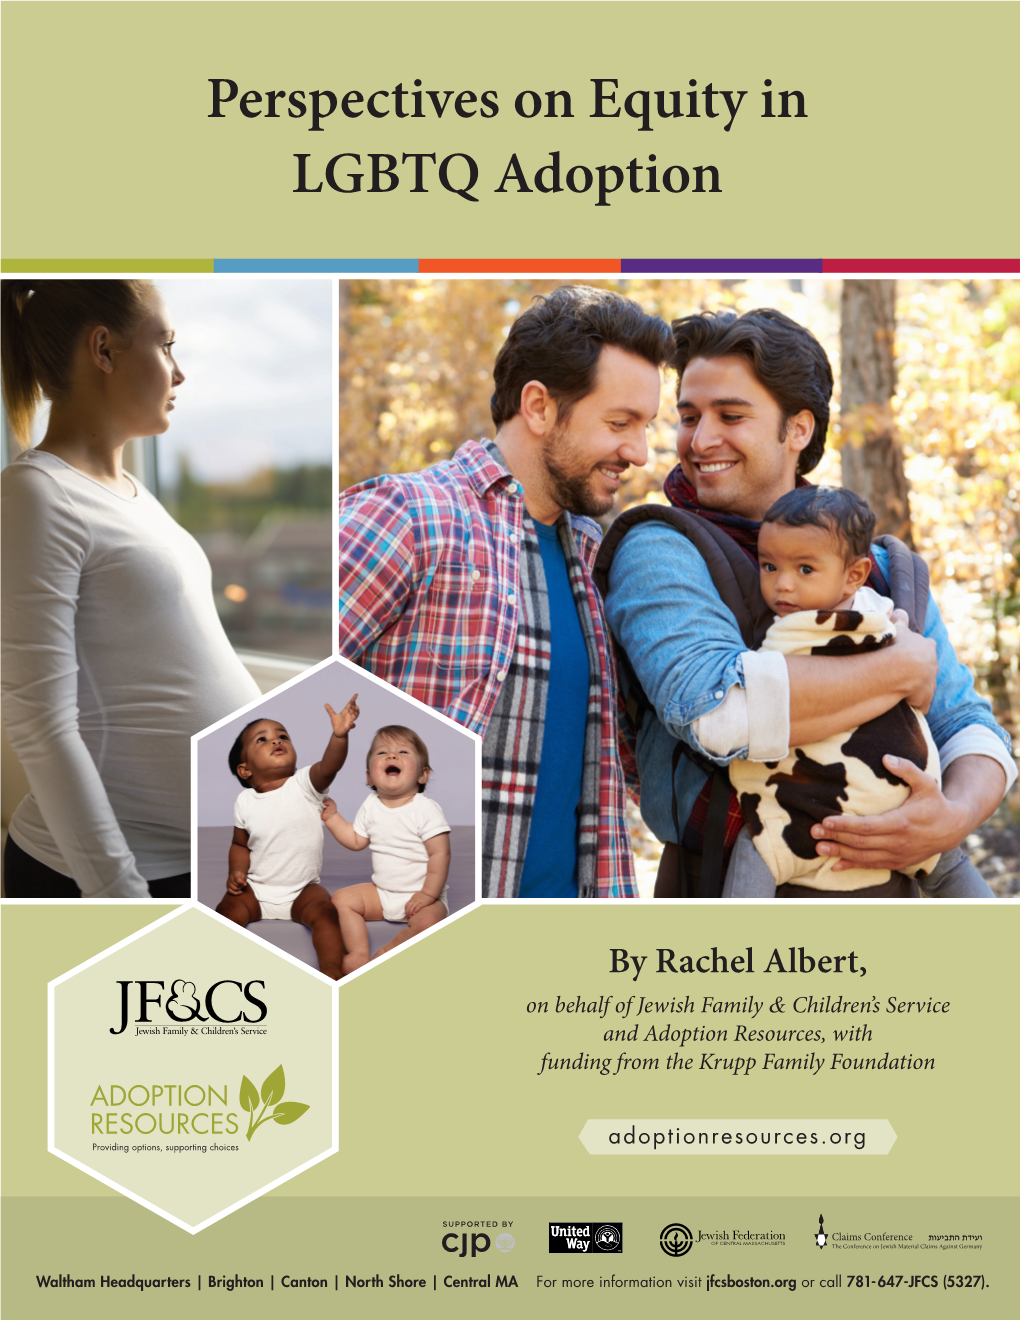 Perspectives on Equity in LGBTQ Adoption